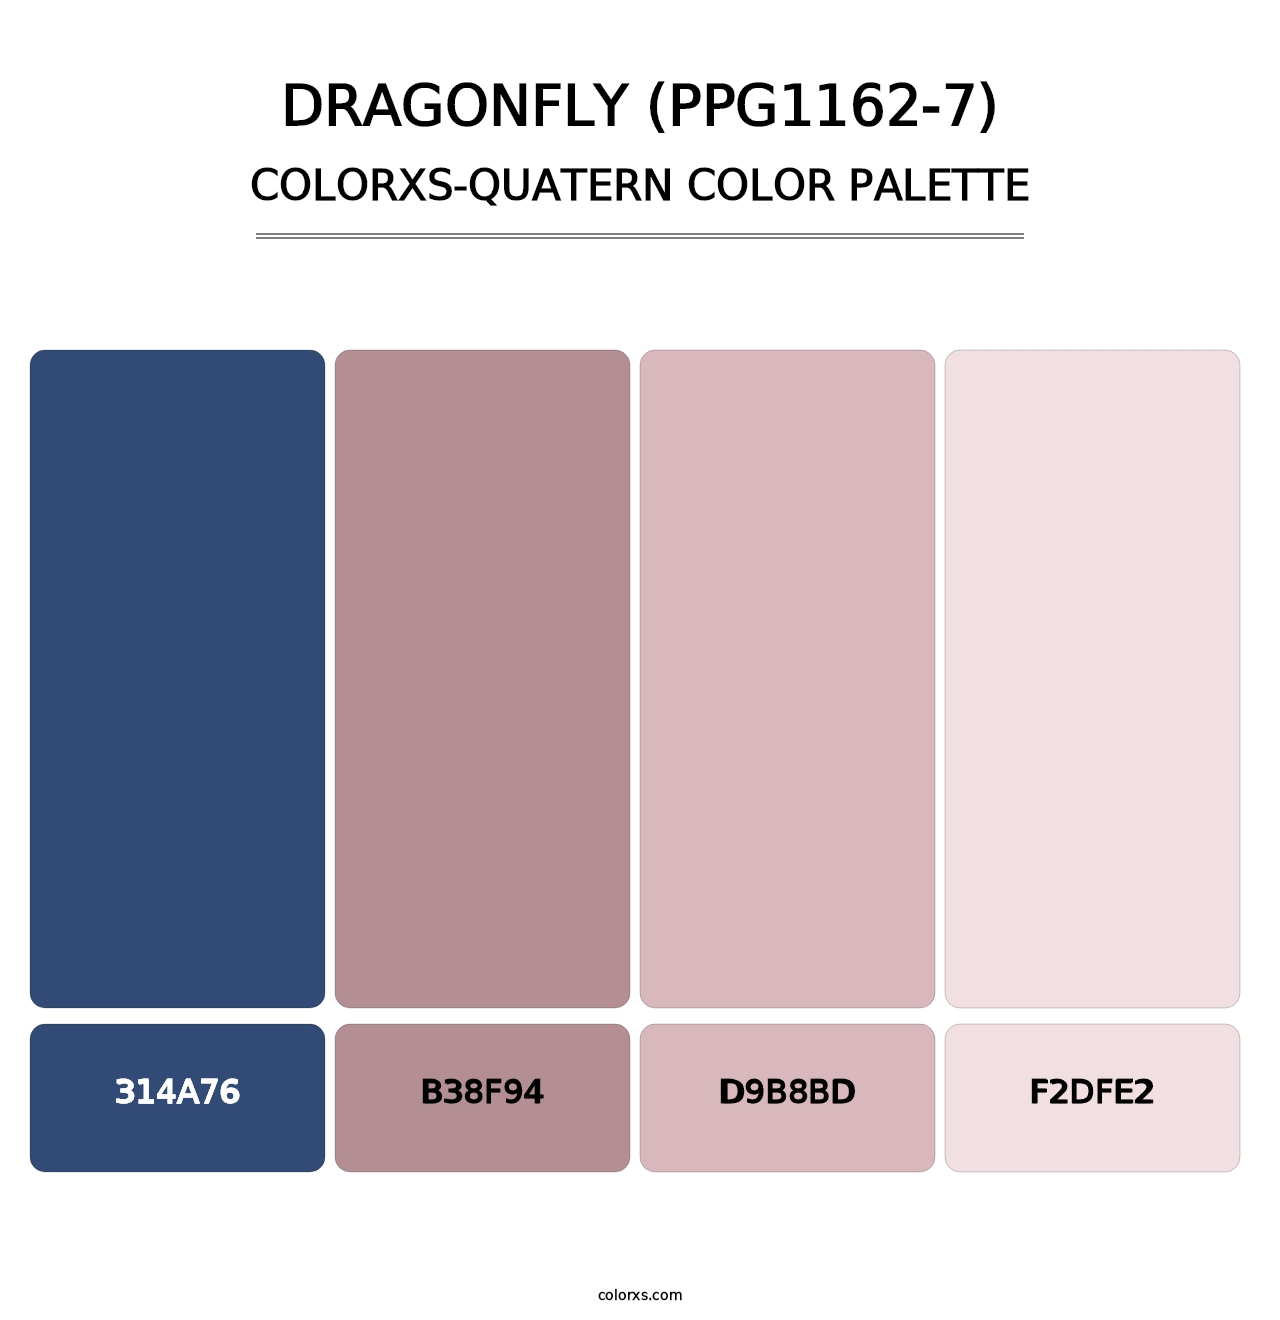 Dragonfly (PPG1162-7) - Colorxs Quatern Palette